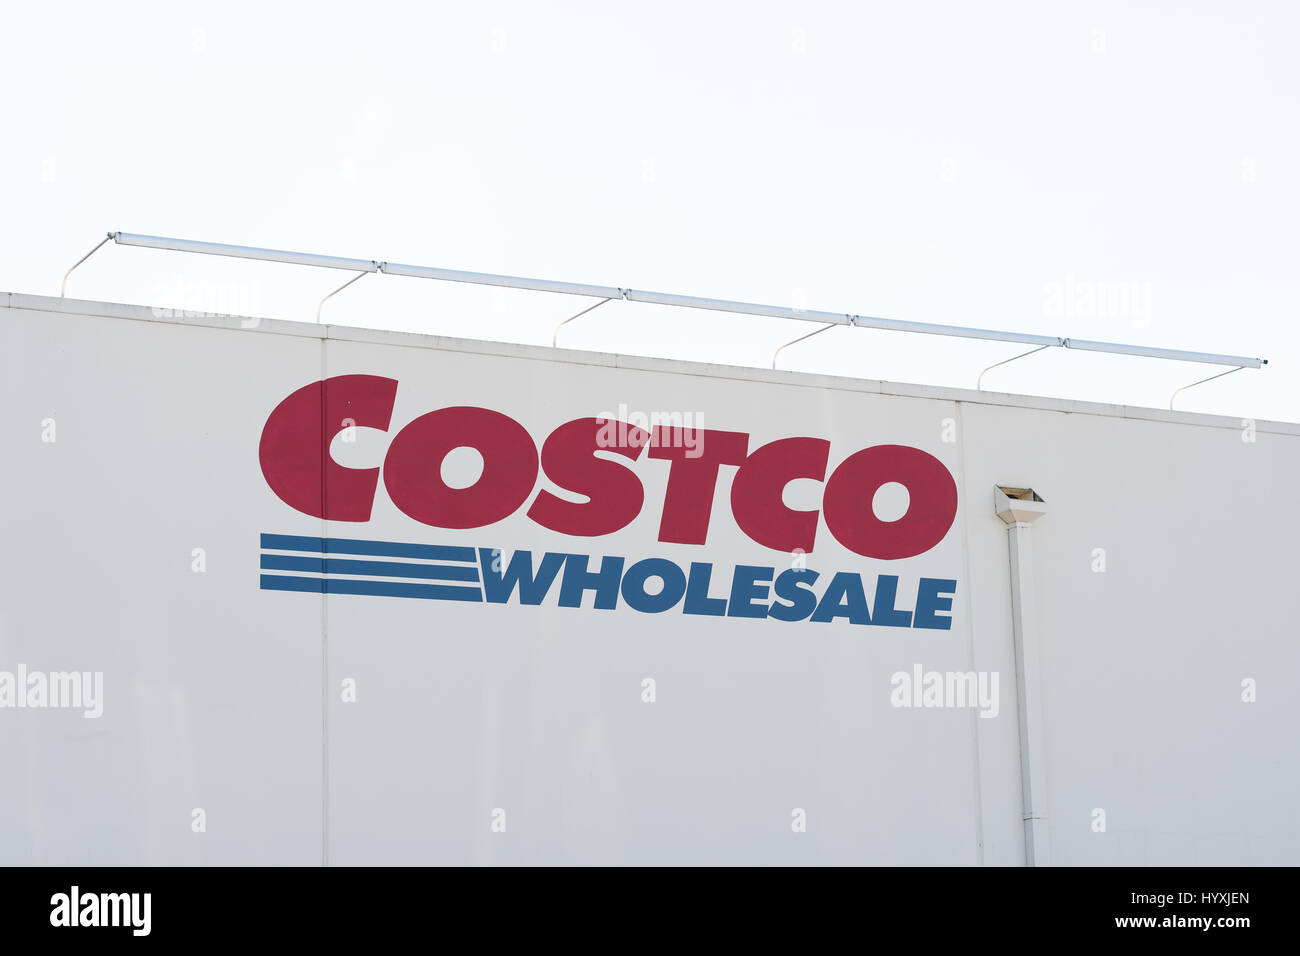 EUGENE, OR - MARCH 31, 2017: Sign for Costco Wholesale, a popular warehouse club for members only in the United States of America. Stock Photo